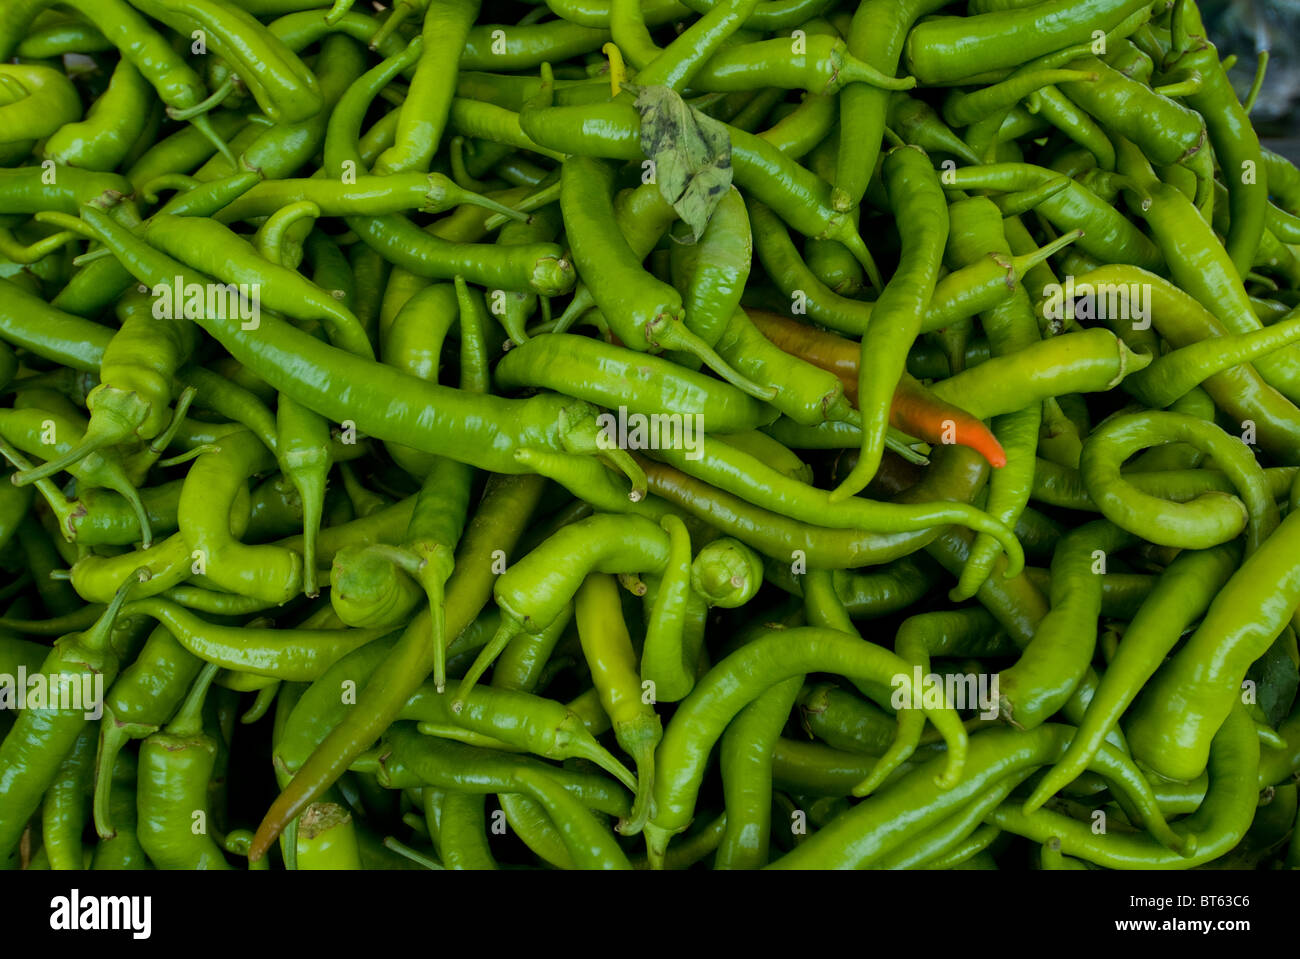 green chillie asian, background, burn, cayenne, chile, chili, chilies, chilli, chilly, close-up, closeup, color, cook, cooking, Stock Photo